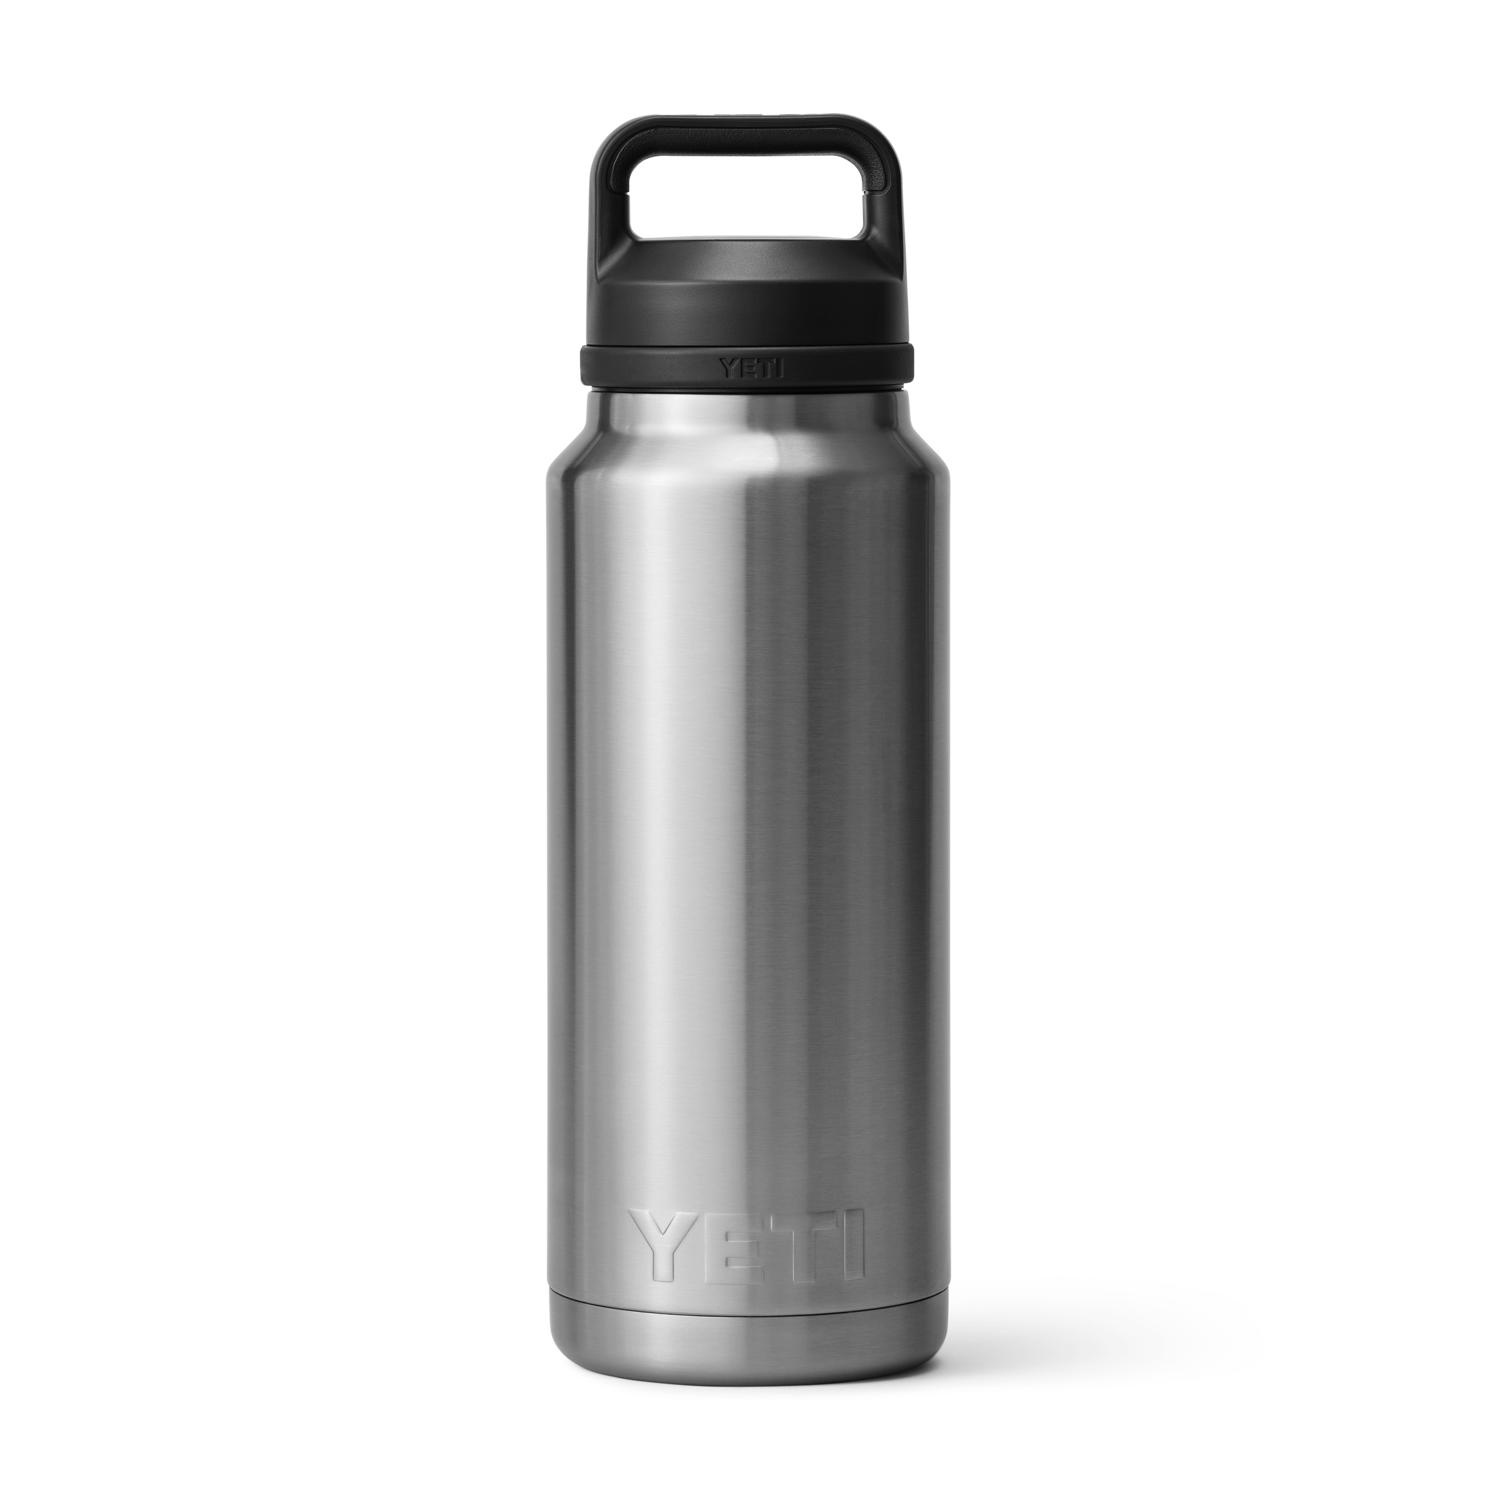 Photos - Other Accessories Yeti Rambler 36 oz Stainless Steel BPA Free Bottle with Chug Cap 210710700 